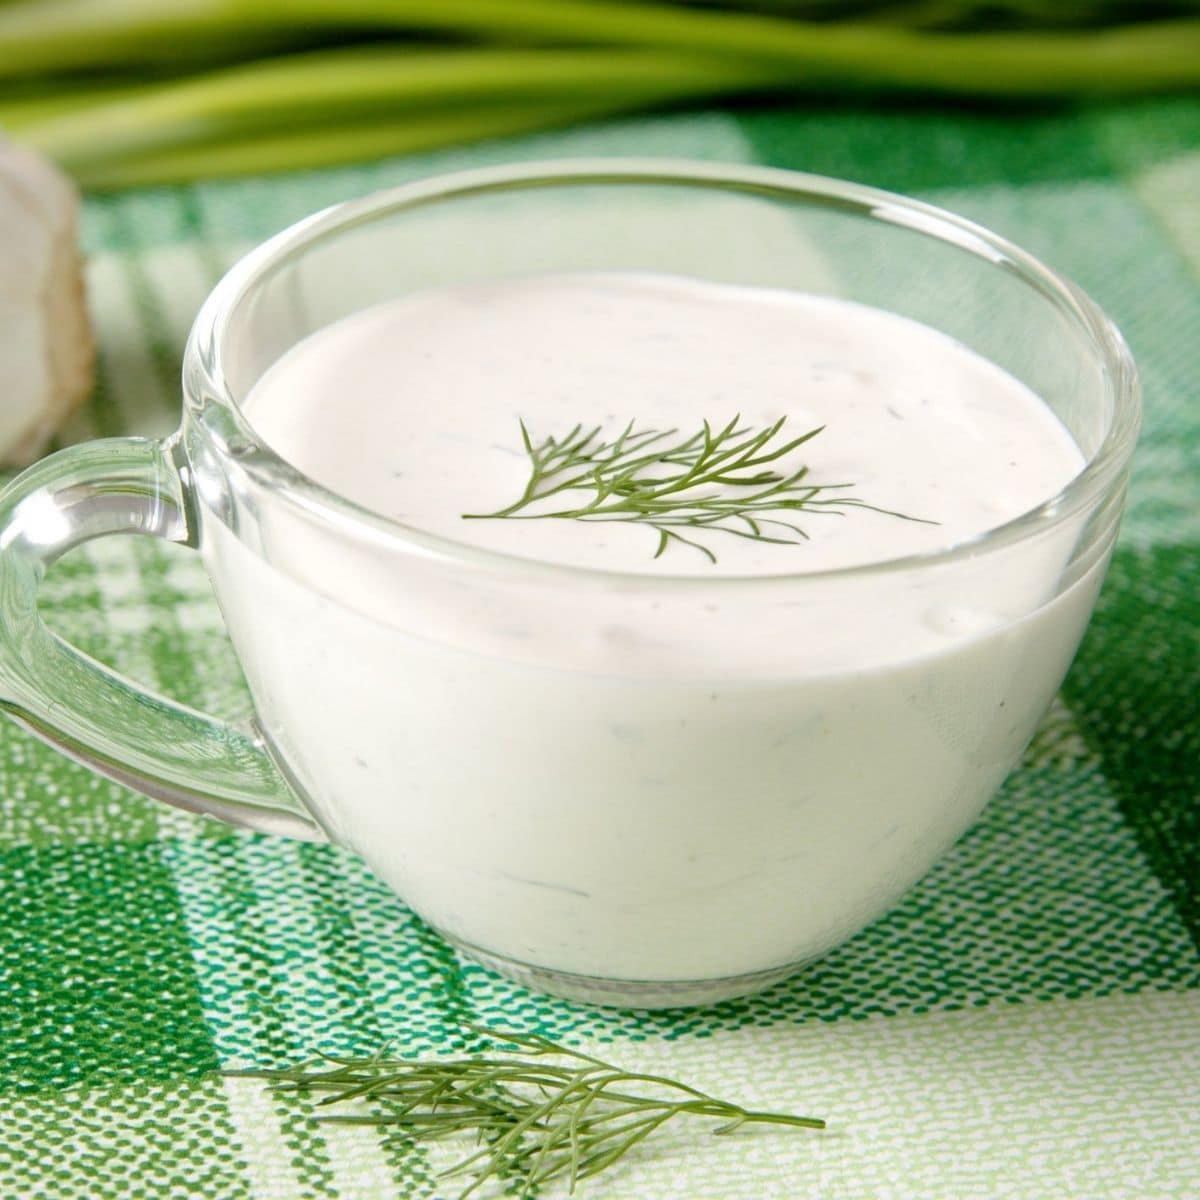 Creme fraiche substitute for cooking and baking, shown in a clear glass with fresh dill.